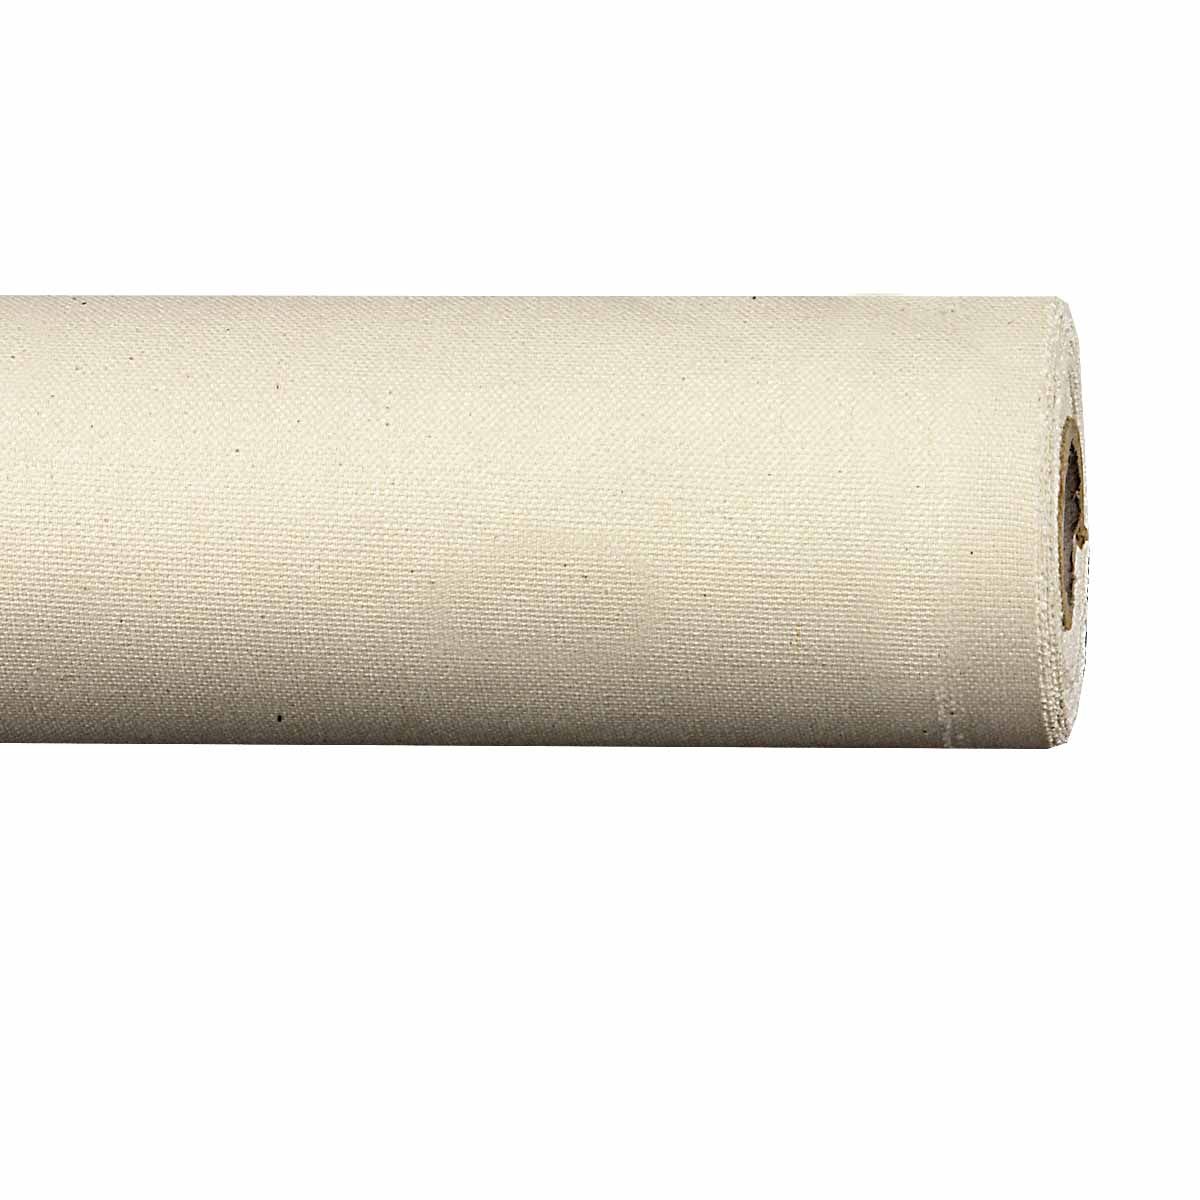 Finest Imported cotton sheeting